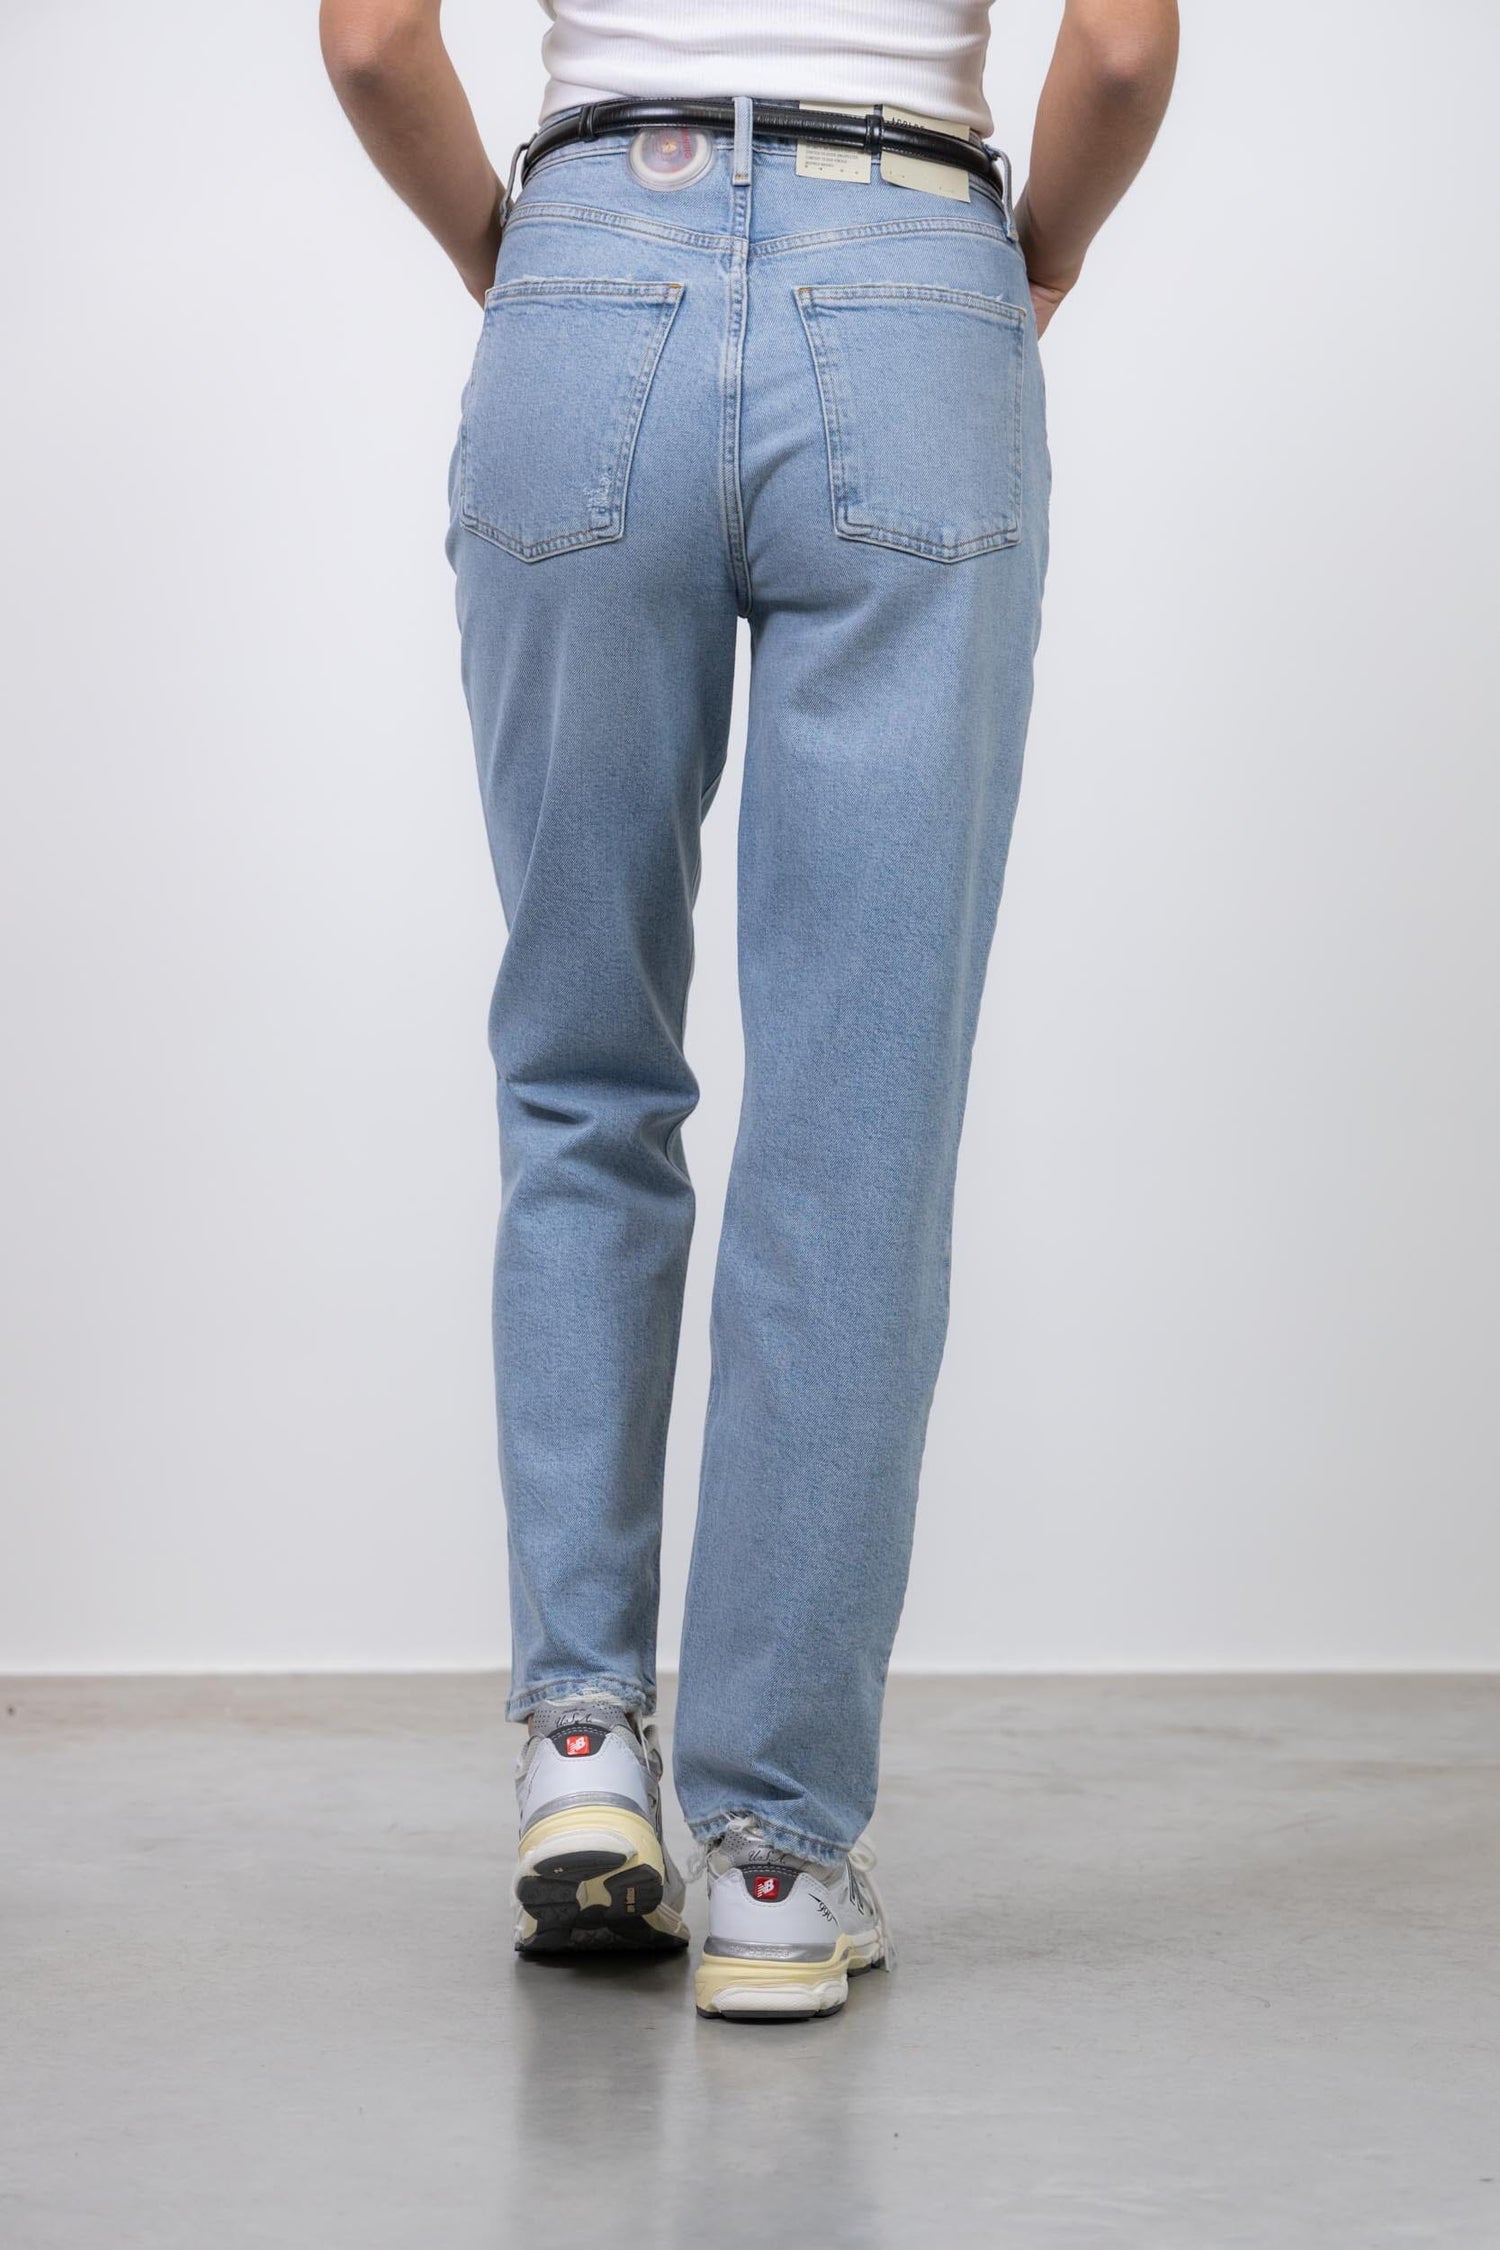 HIGH RISE STOVE PIPE JEANS IN DESTINATION JEANS AGOLDE 